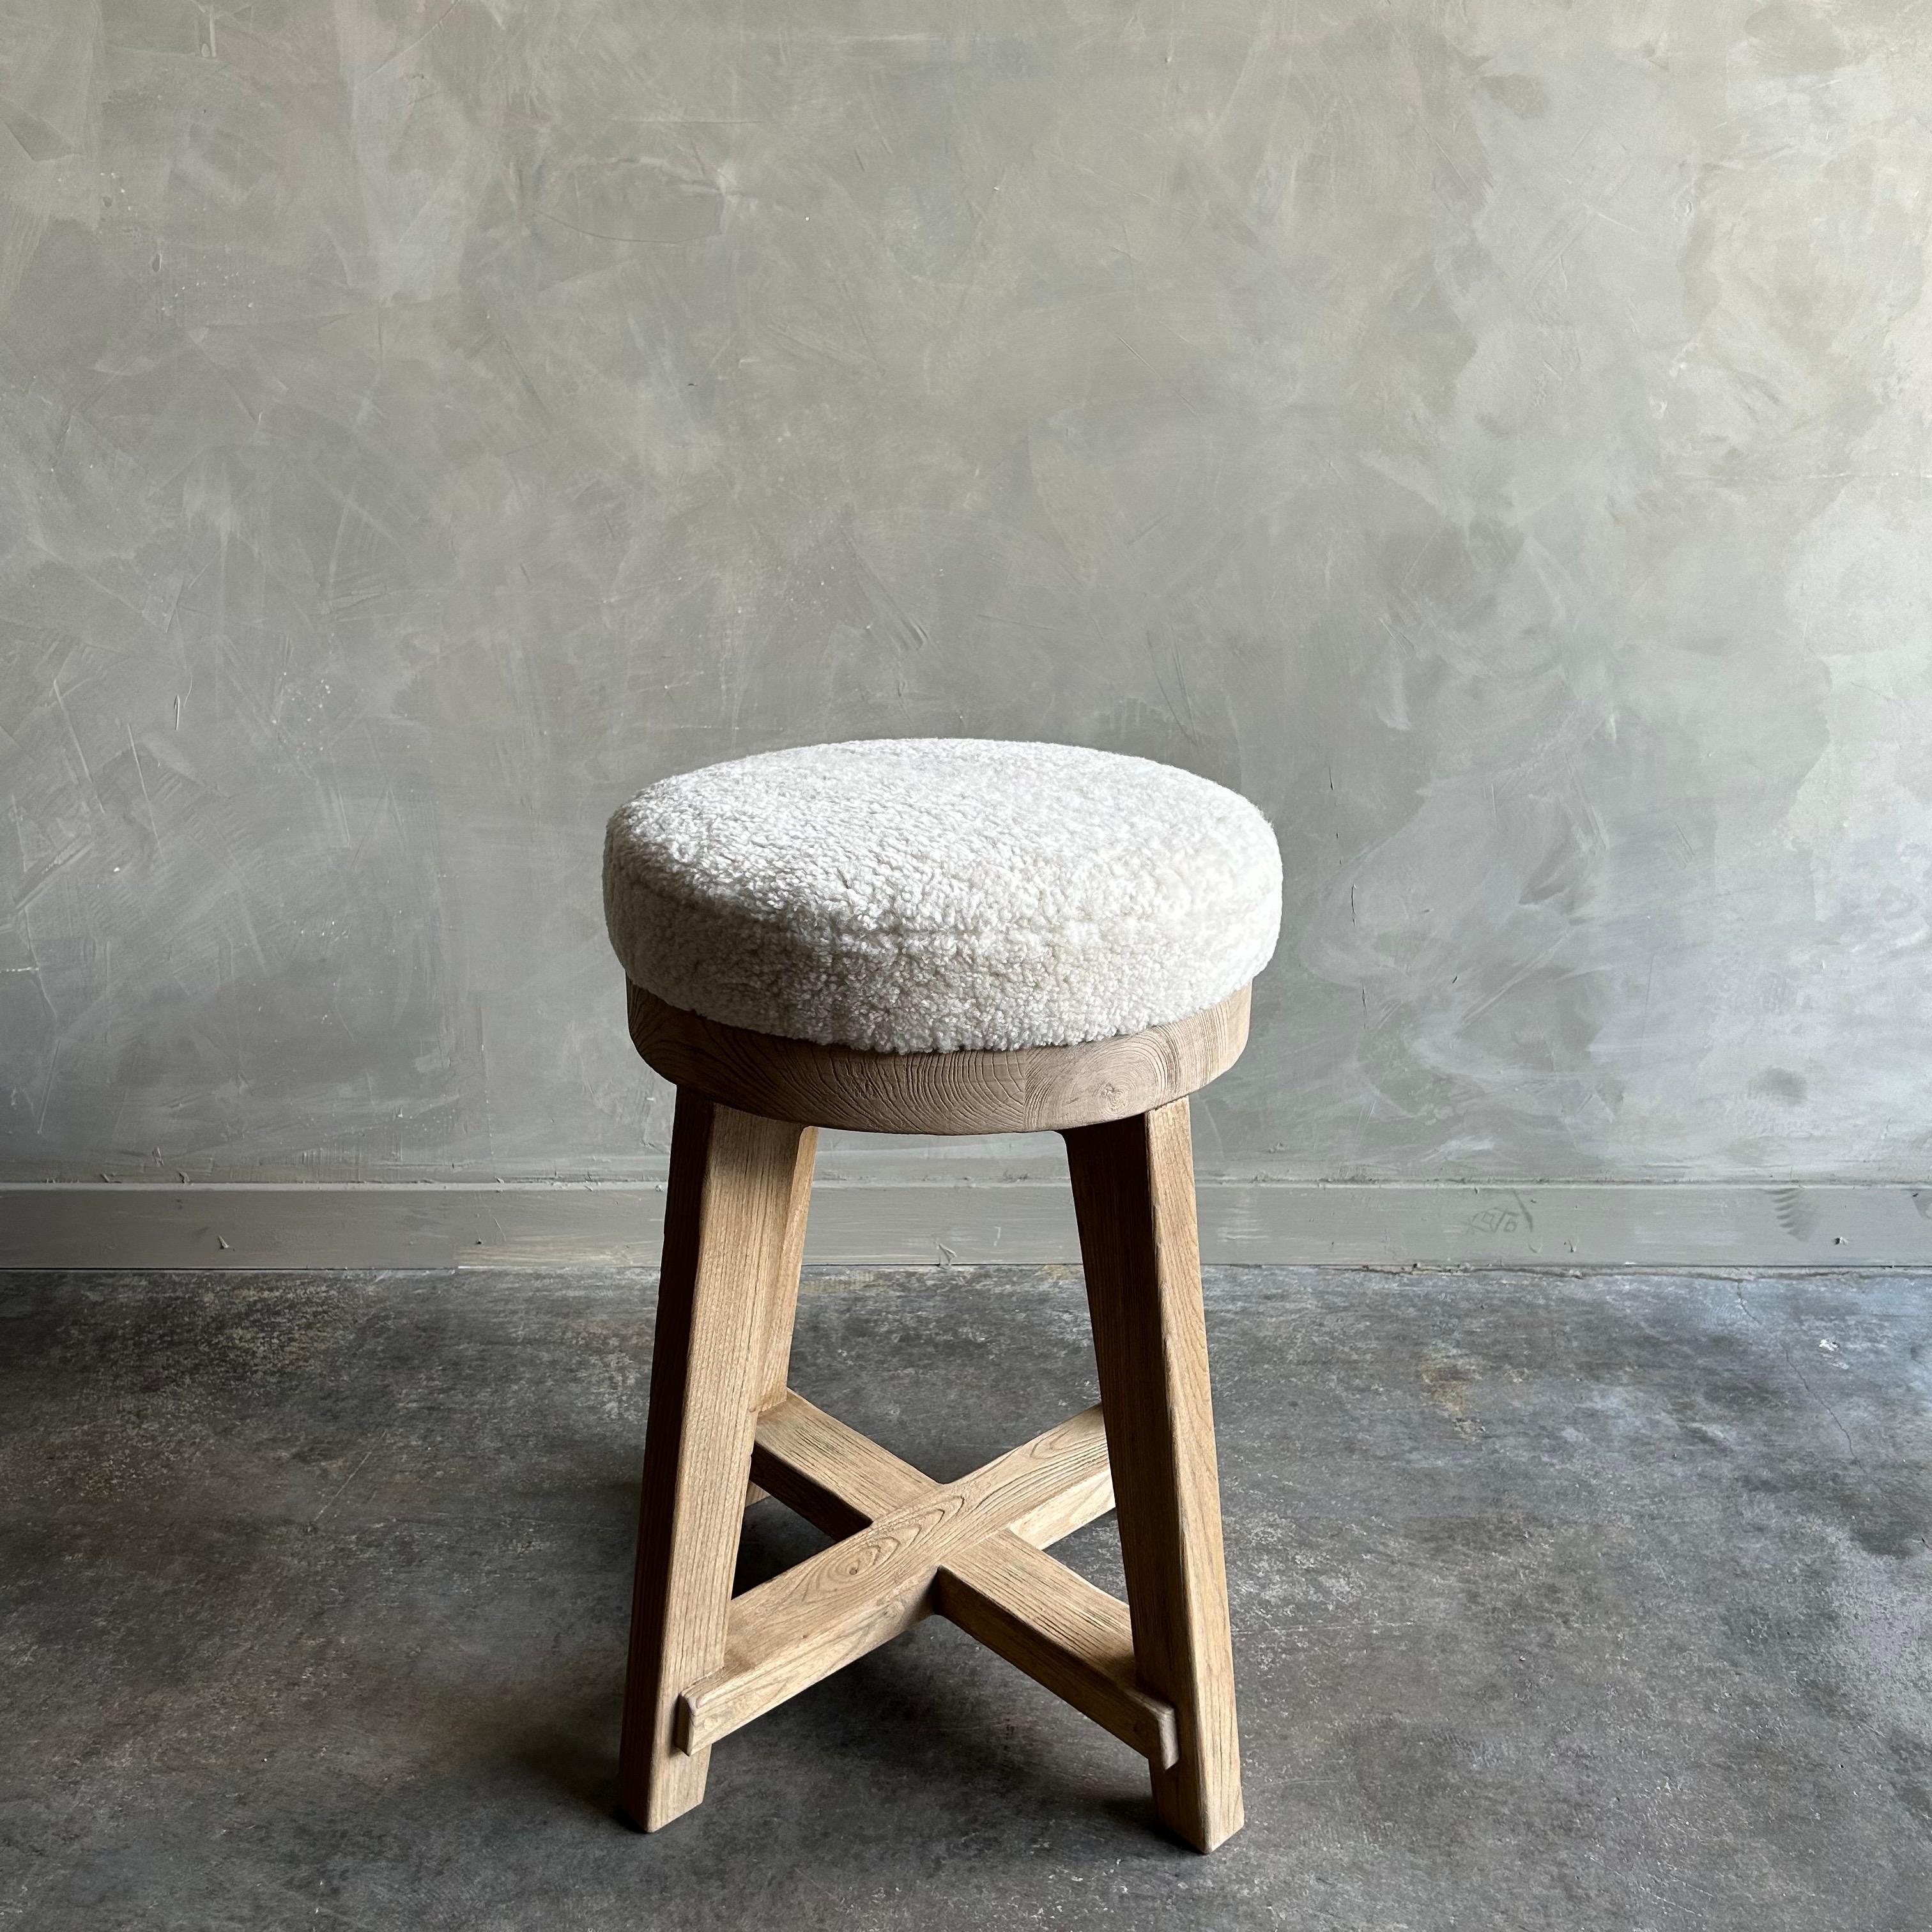 Jasper Counter Stool
Made from reclaimed elm wood timbers, this counter stool has a unique vintage feel.
Upholstered in 100% lambs sheep, we also offer C.O.M. & our Libeco Linen colors in oyster white, oatmeal and vintage flax. 
Finish: Natural
3